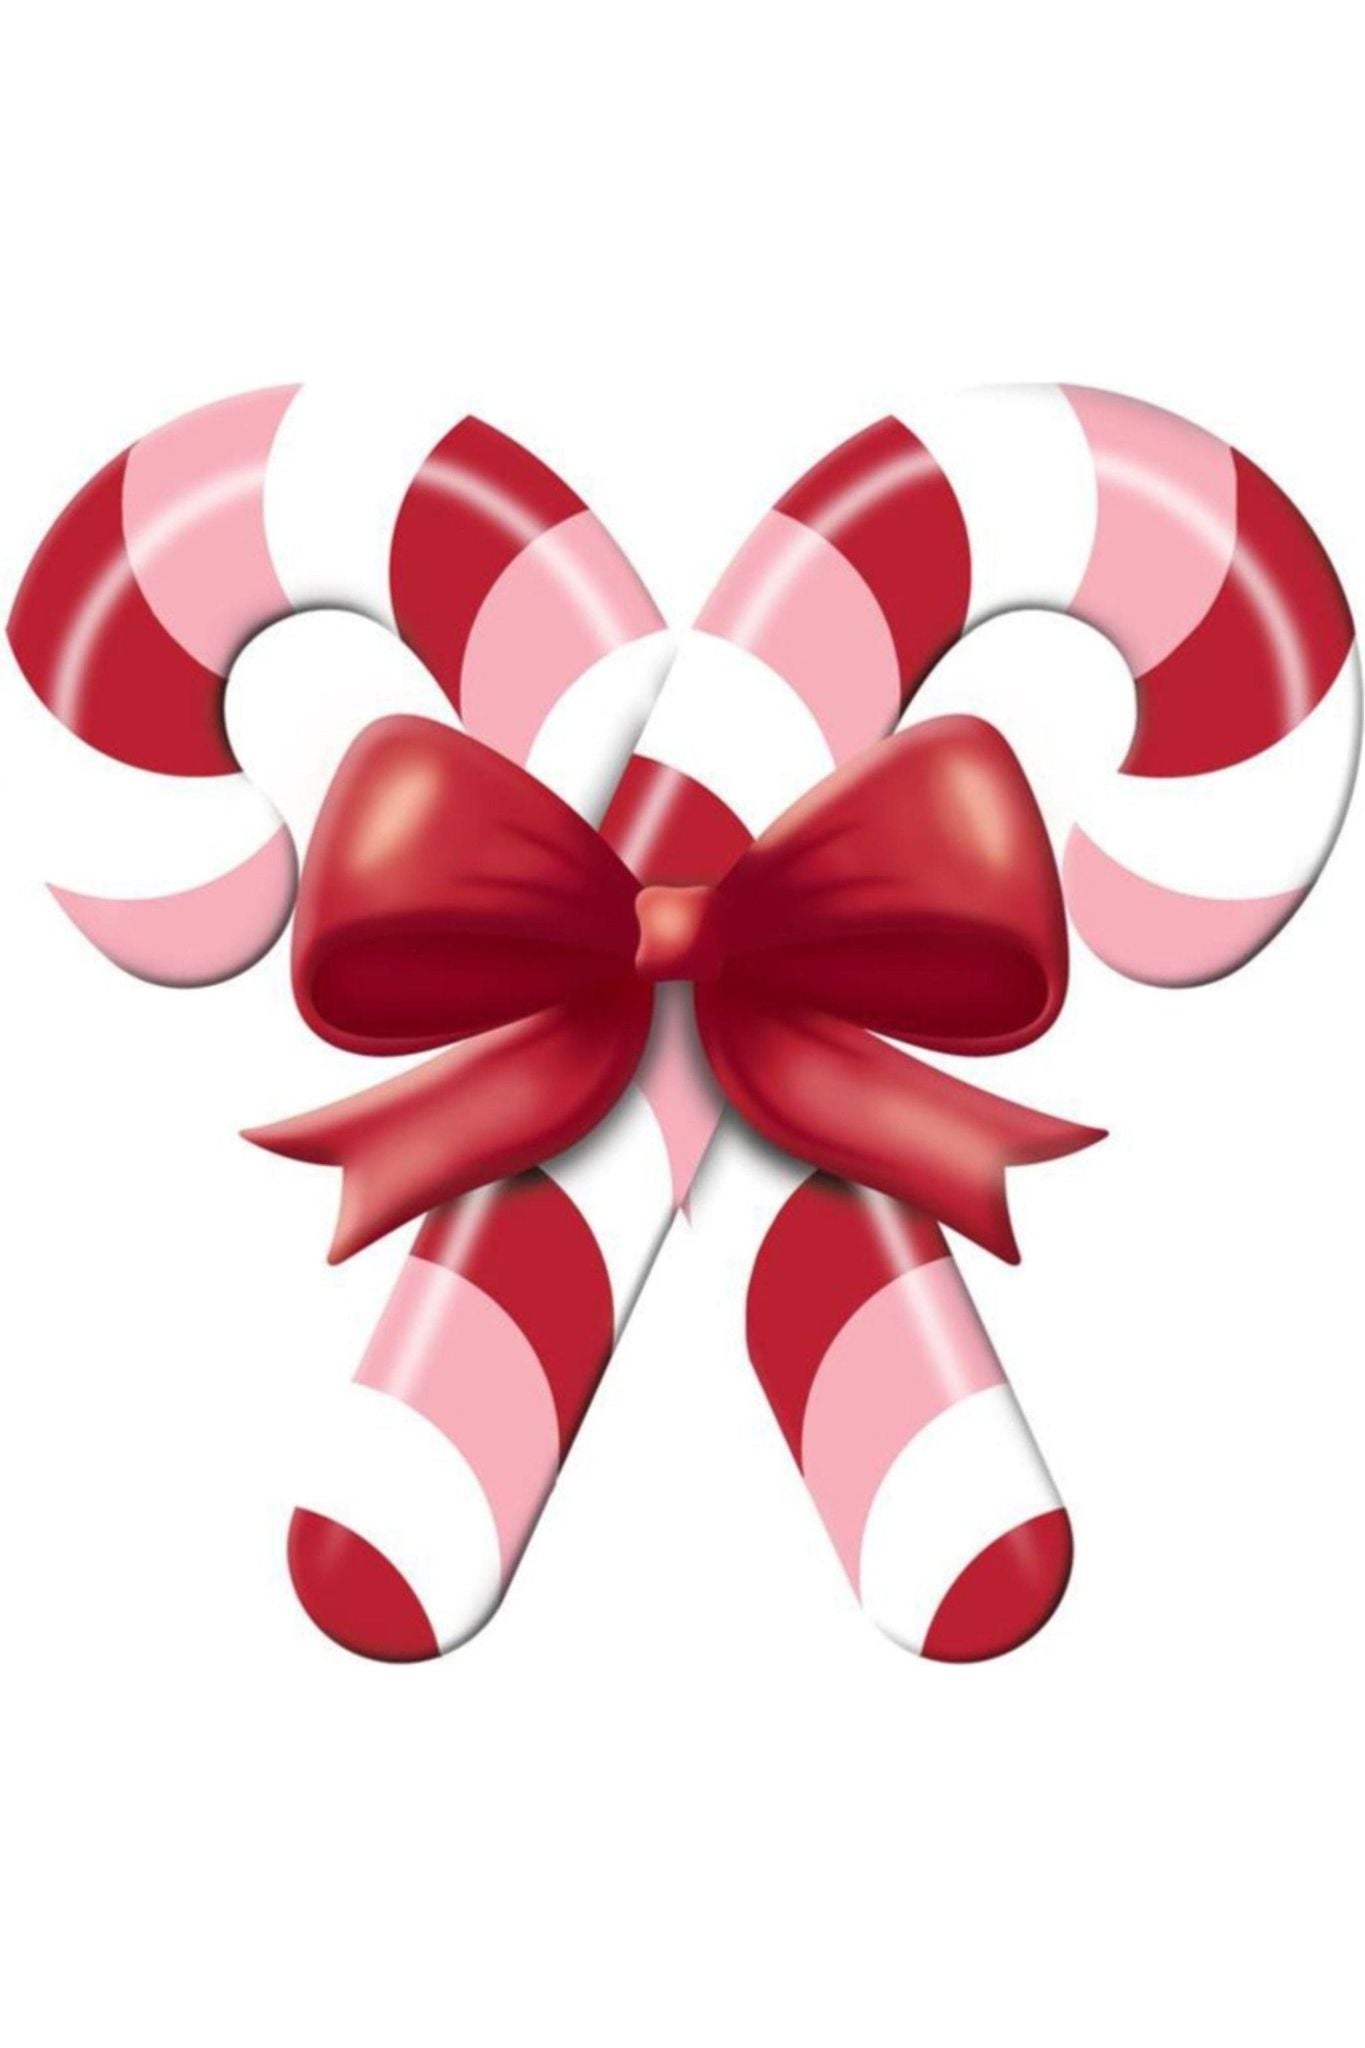 Shop For 13" Metal Embossed Candy Canes: Pink/Red MD136593